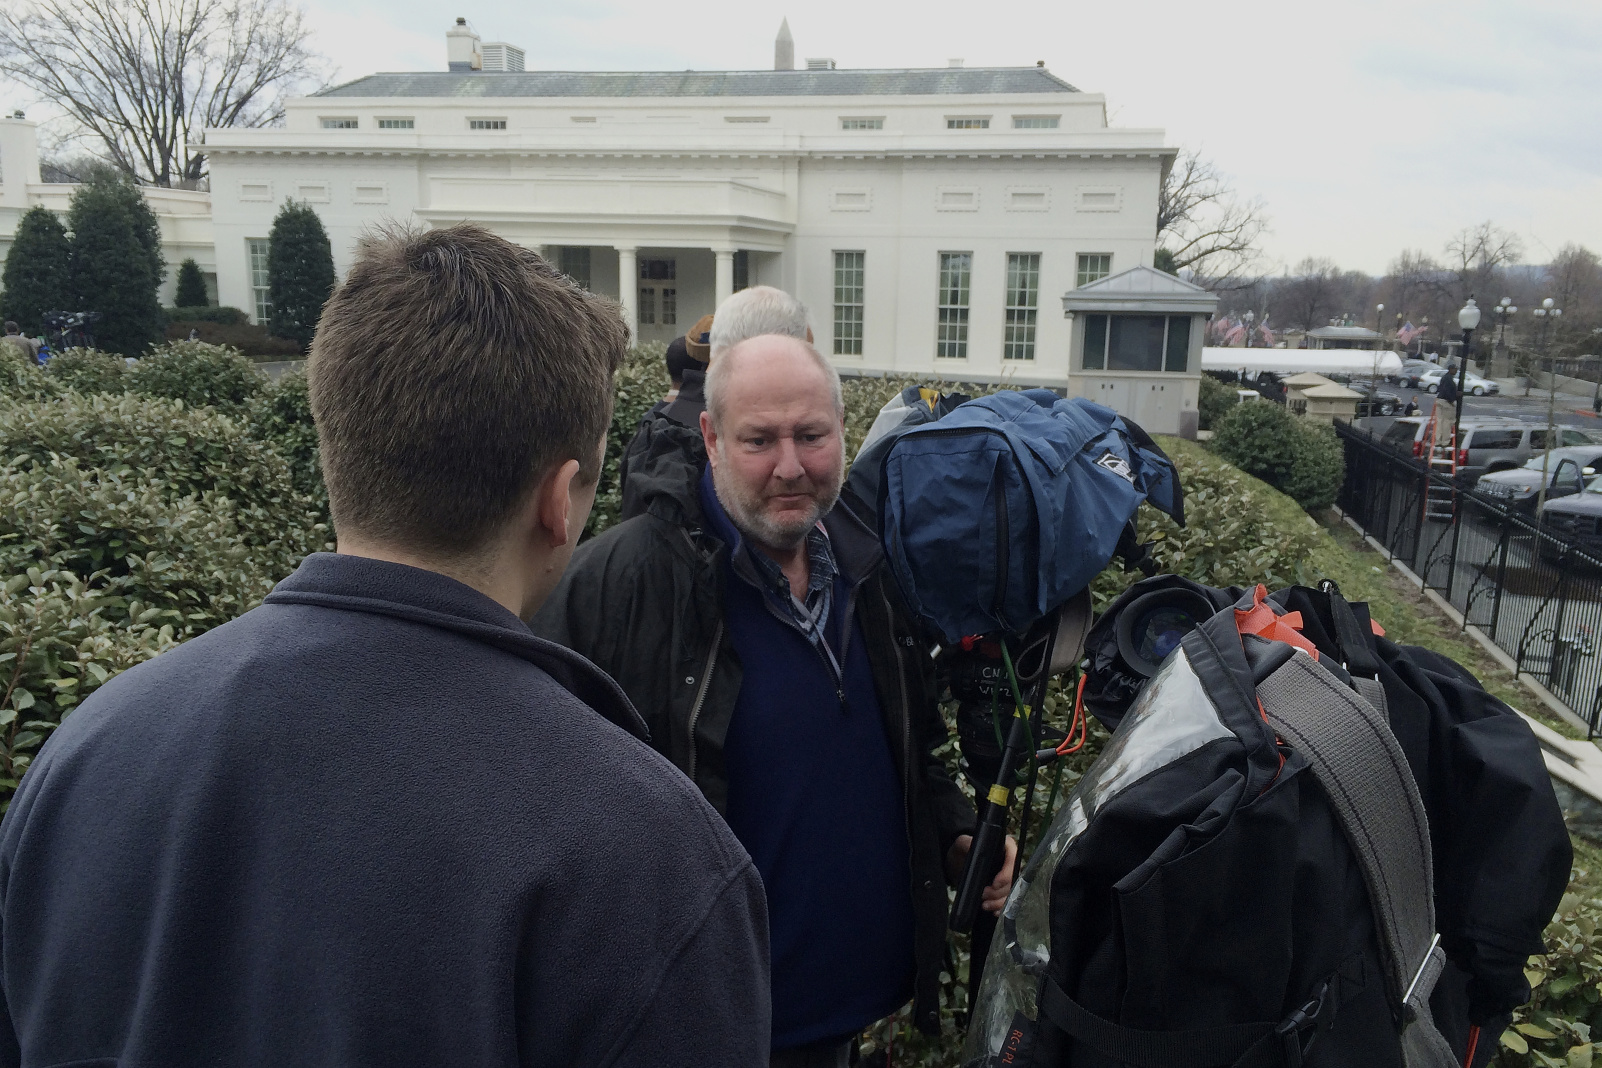 Television news cameramen point their cameras to the West Wing entrance of the White House in Washington, Friday, Feb. 21, 2014, hoping to catch Tibetan spiritual leader the Dalai Lama arriving for a closed press meeting with President Barack Obama. Photo: AP